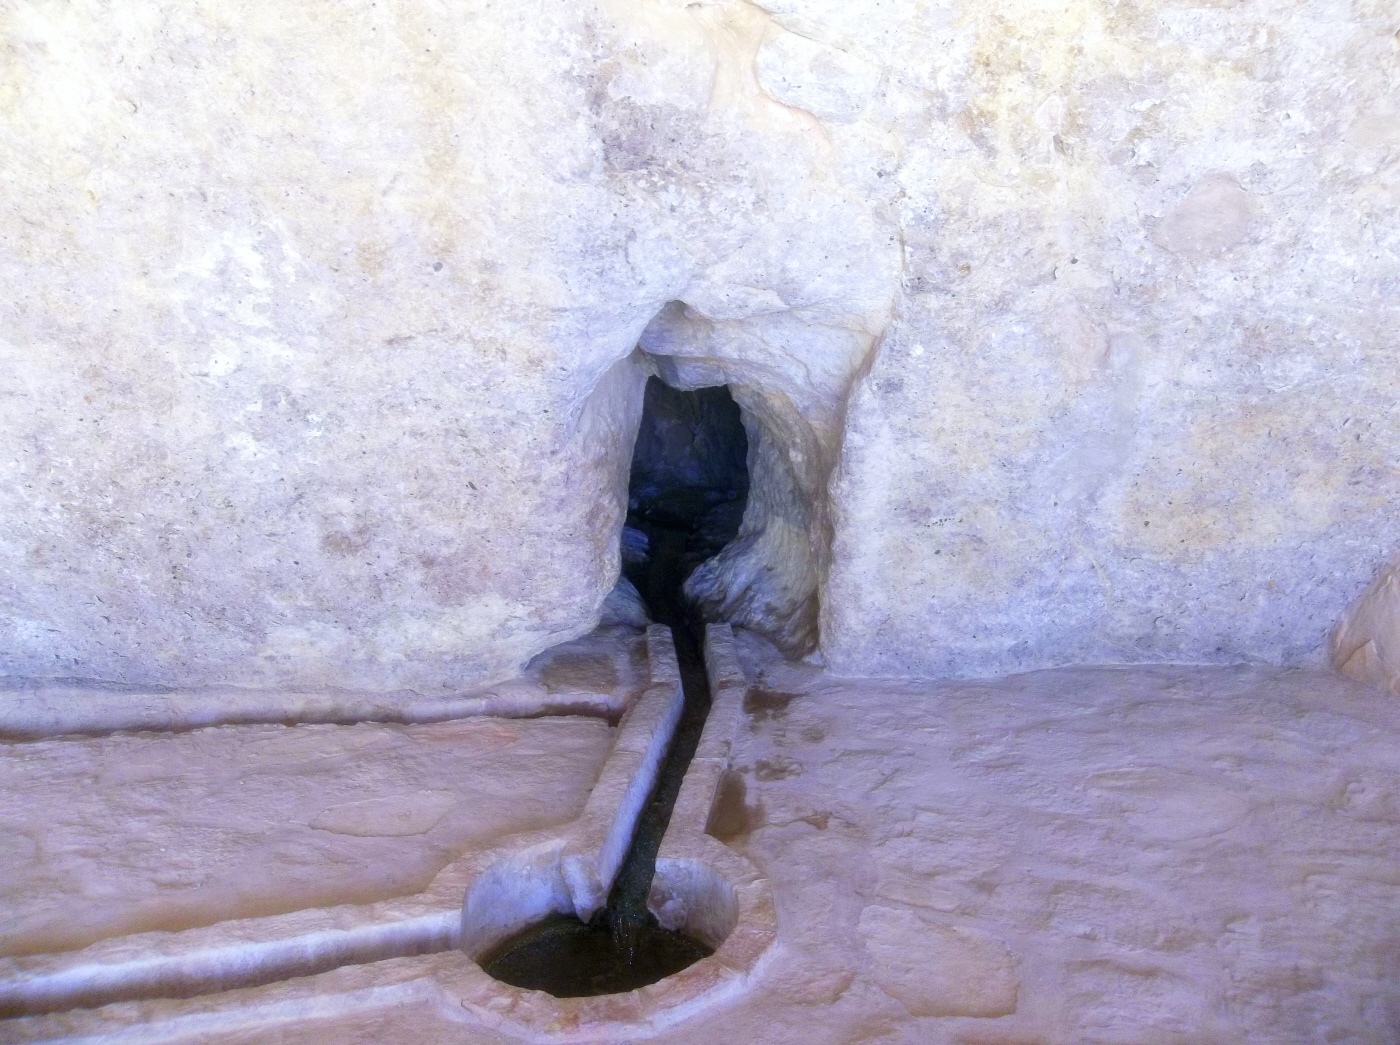 Sacred Spring - Never Runs Dry - Flowing Since St. Anthony The Anchorite (251-356 A.D.) Stayed in the Desert